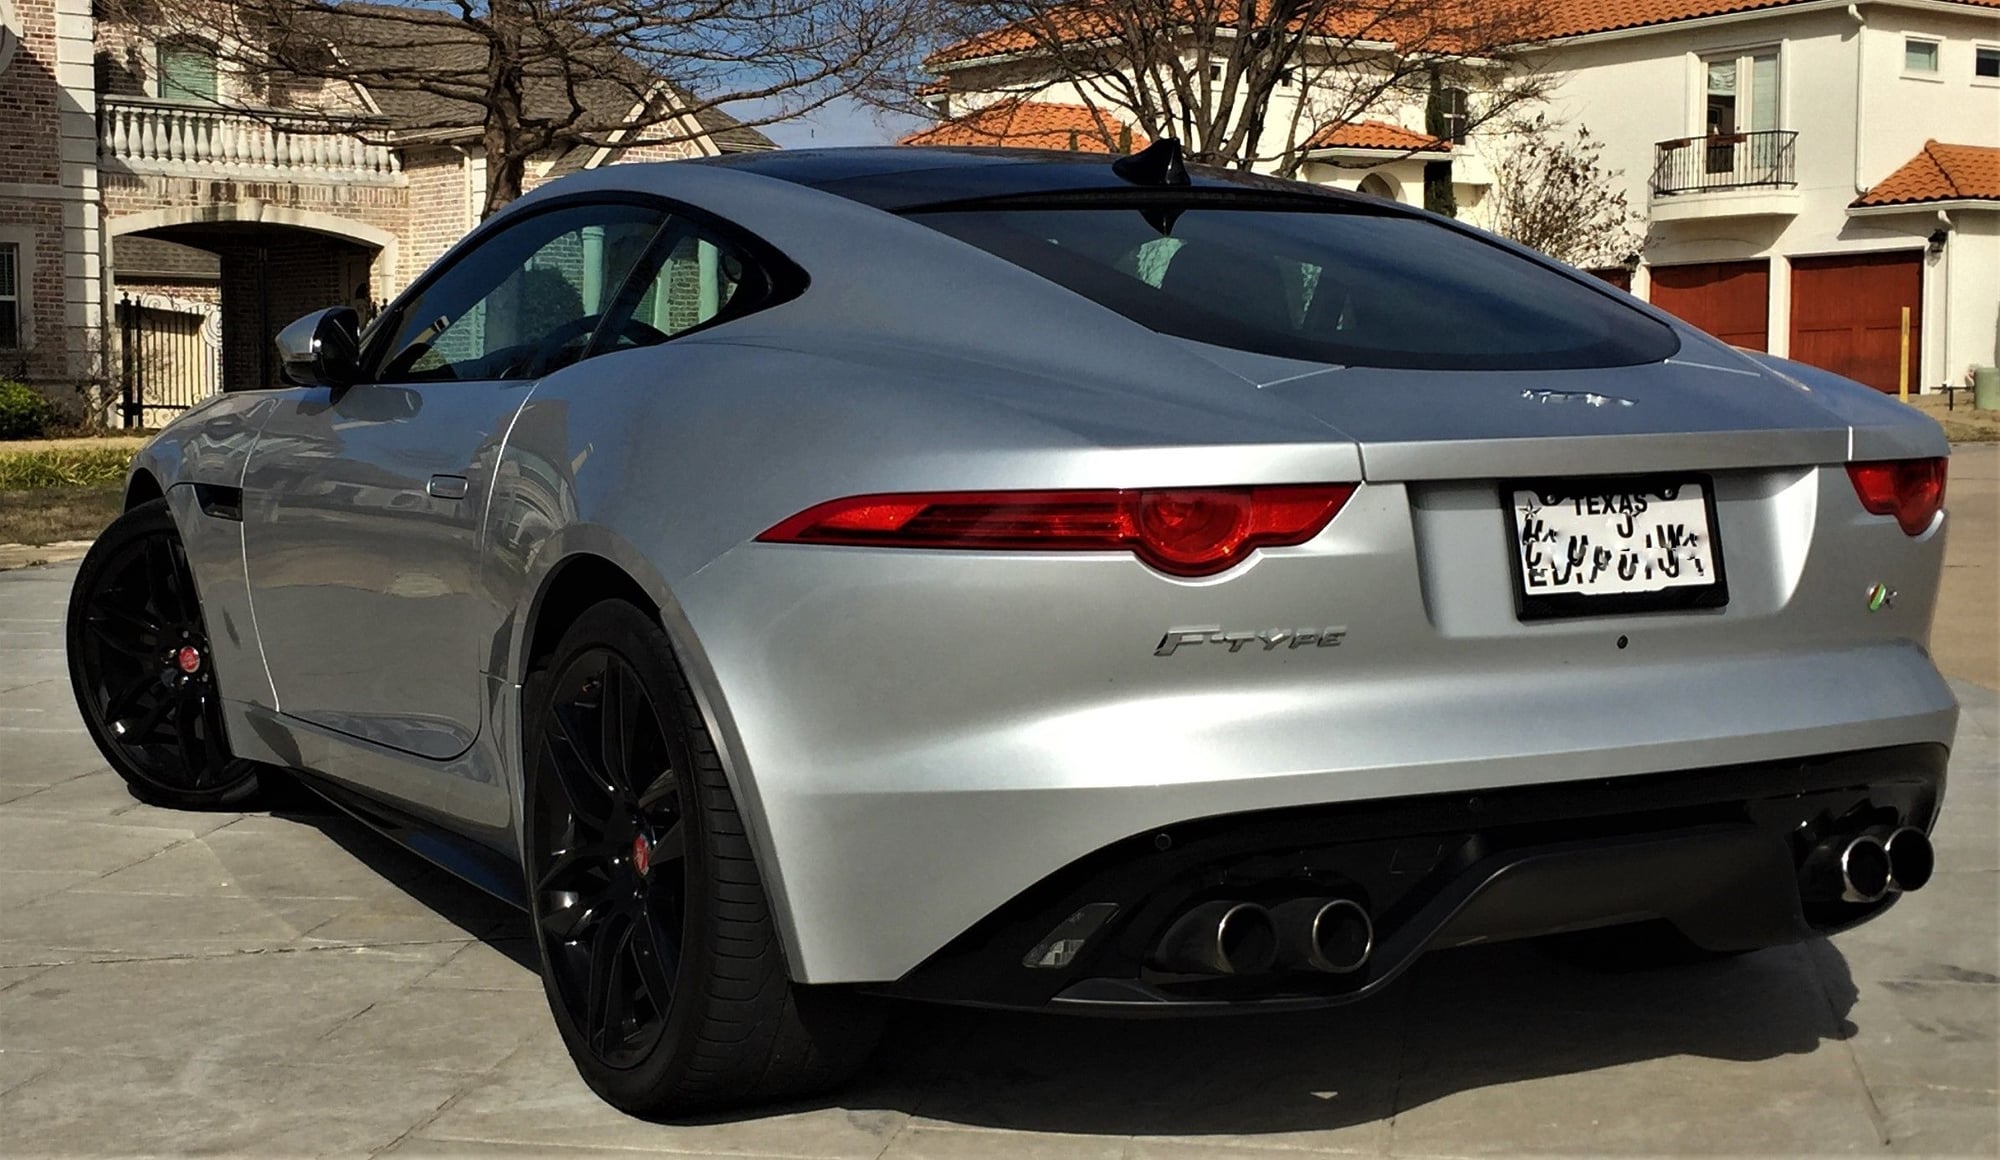 2015 Jaguar F-Type - 2015 Jaguar F-Type R with all of the right options! - Used - VIN SAJWA6DA0FMK15068 - 21,500 Miles - 8 cyl - 2WD - Automatic - Coupe - Silver - Garland, TX 75044, United States